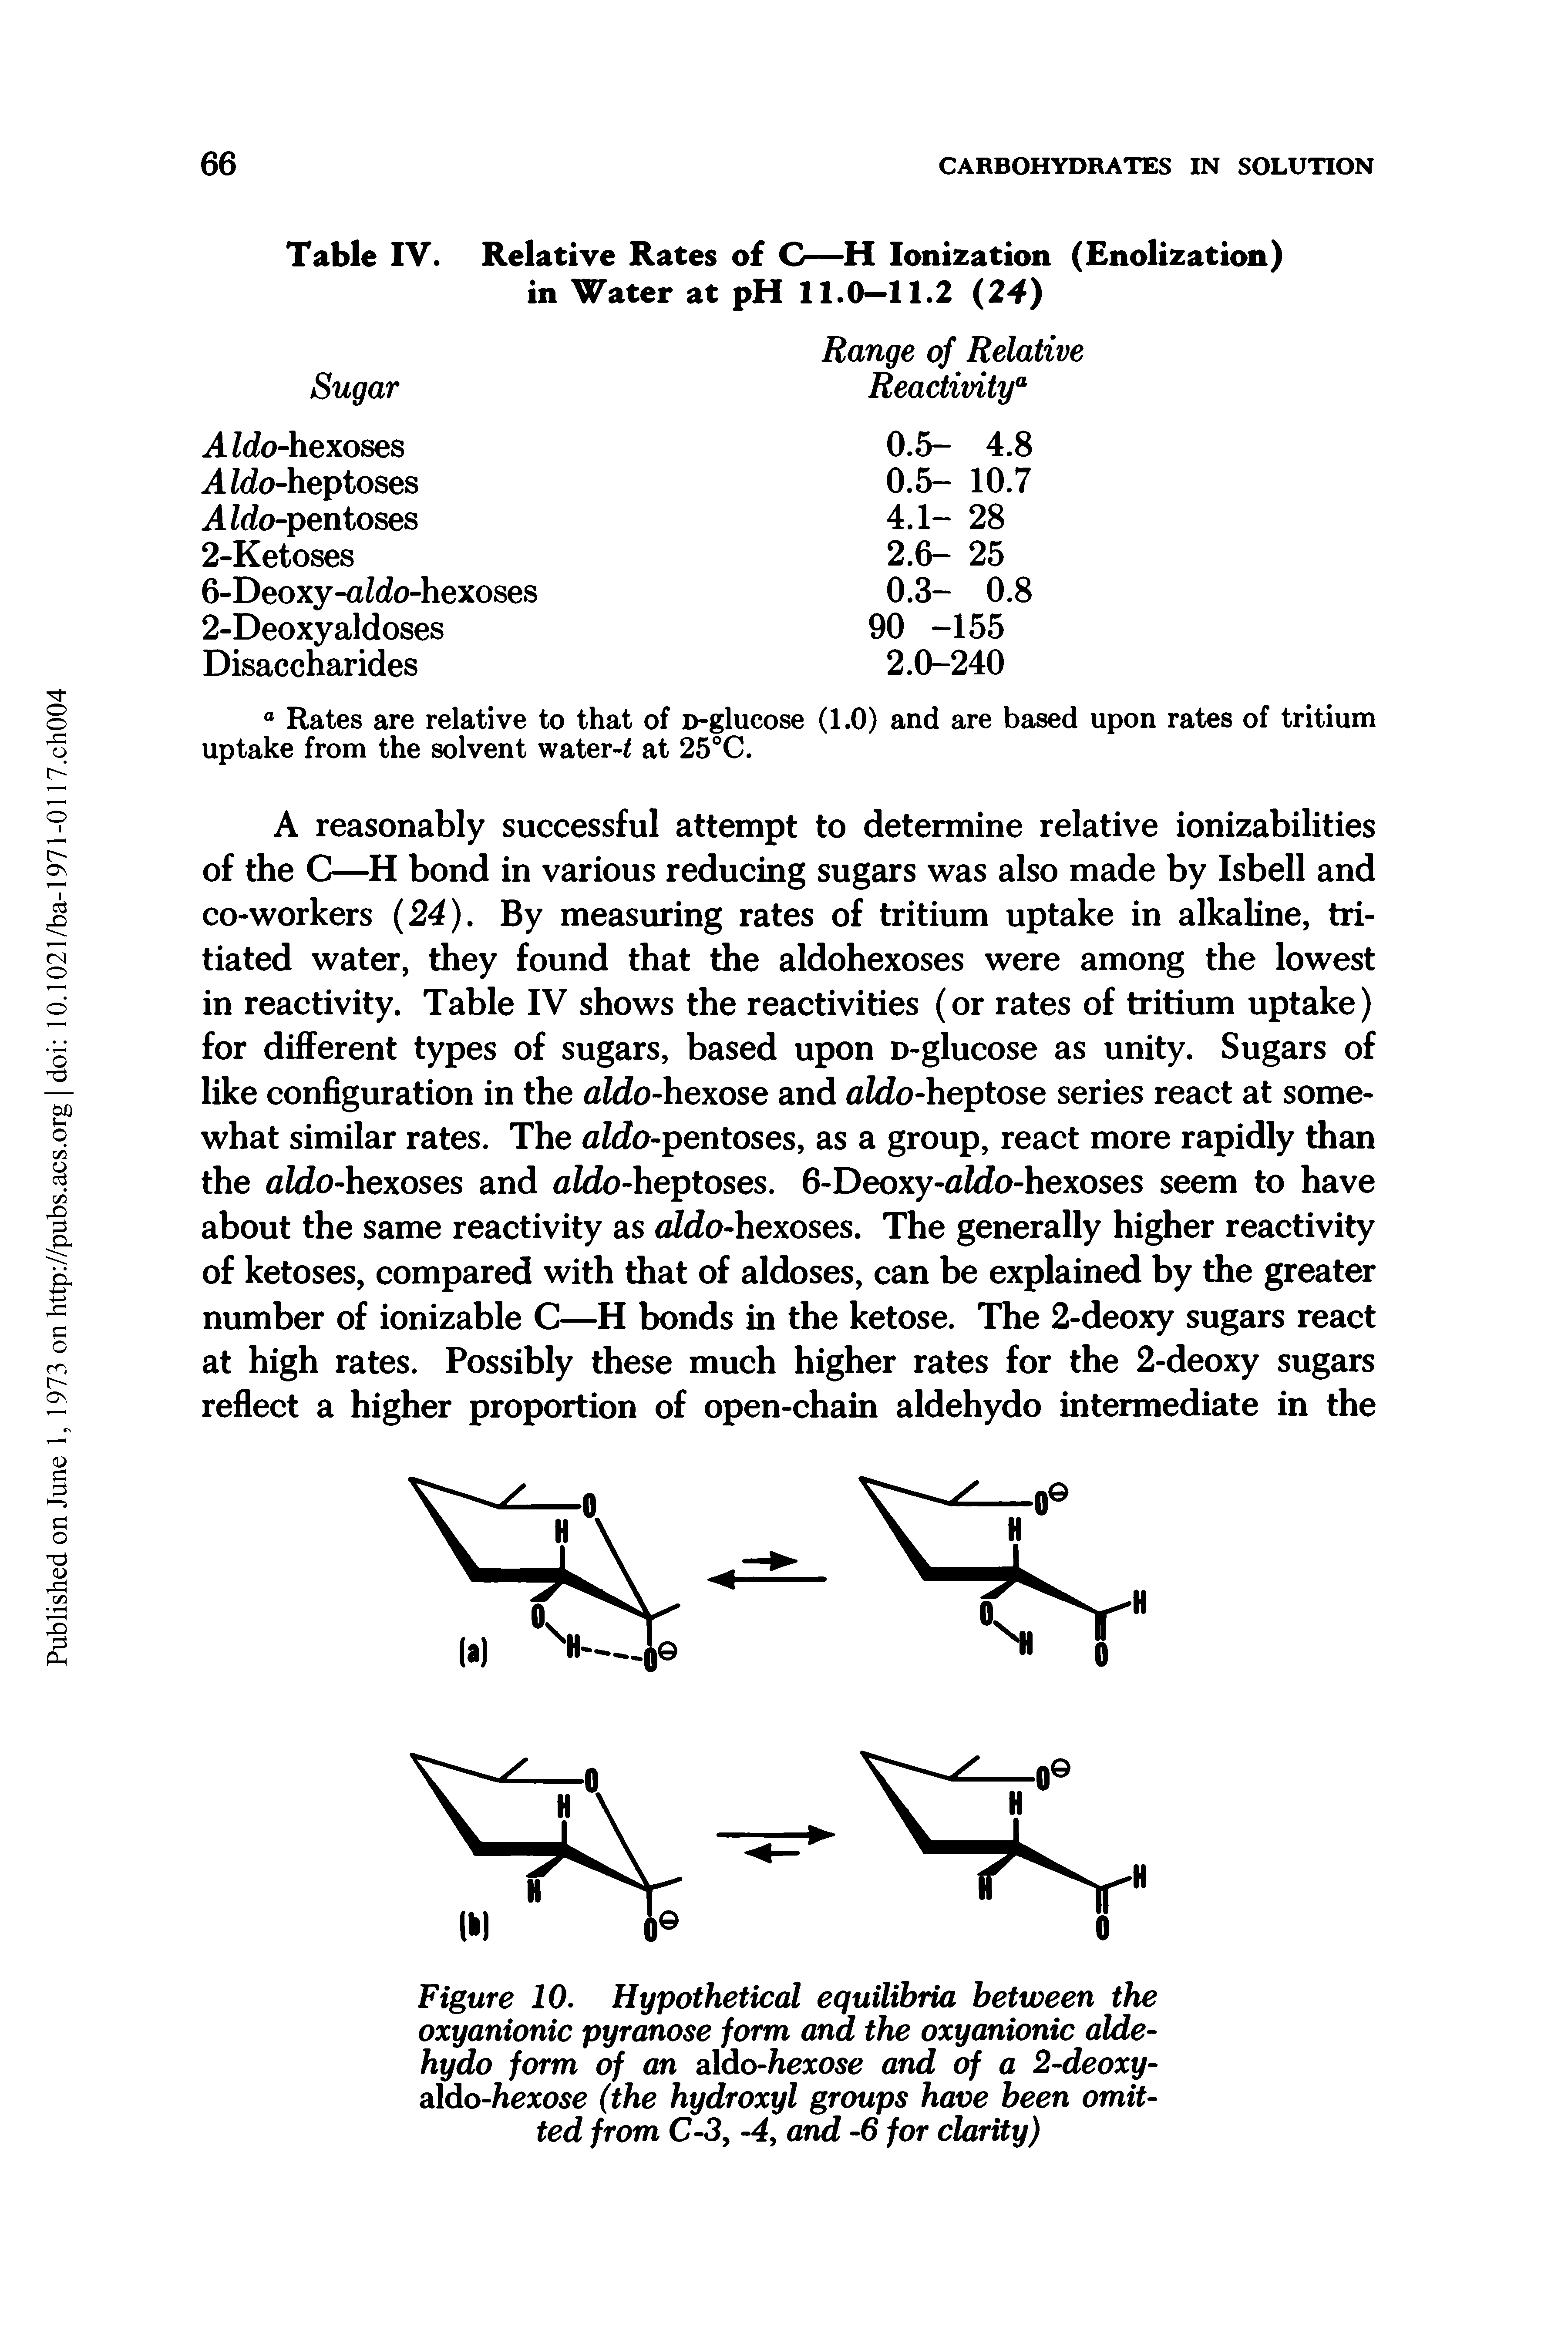 Figure 10. Hypothetical equilibria between the oxyanionic pyranose form and the oxyanionic aldehydo form of an aldo -hexose and of a 2-deoxy-aldo-hexose (the hydroxyl groups have been omitted from C-3, -4, and -6 for clarity)...